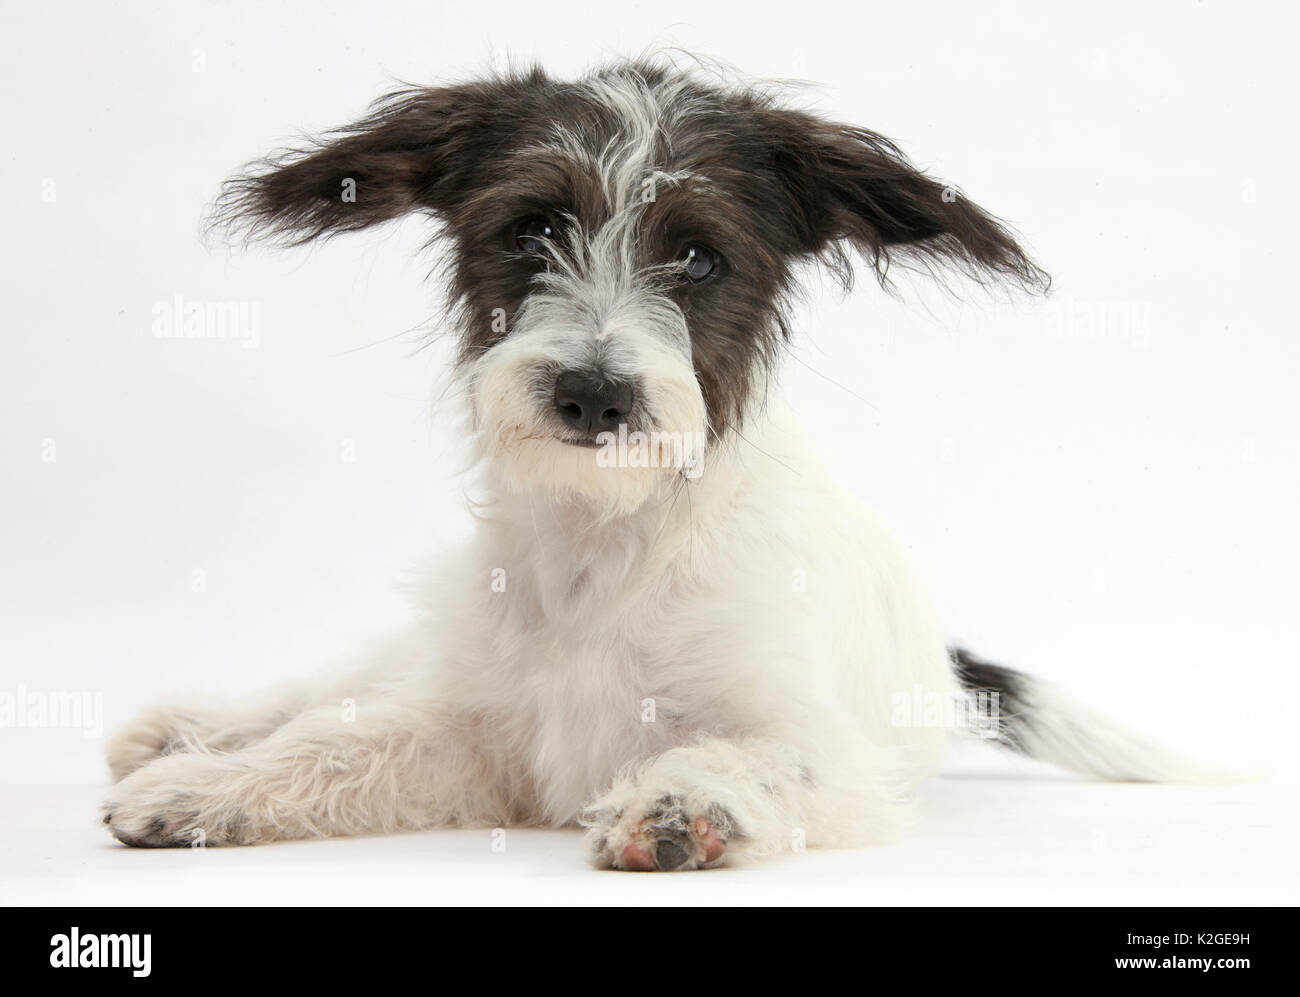 Black-and-white Jack-a-poo, Jack Russell cross Poodle puppy Stock Photo -  Alamy